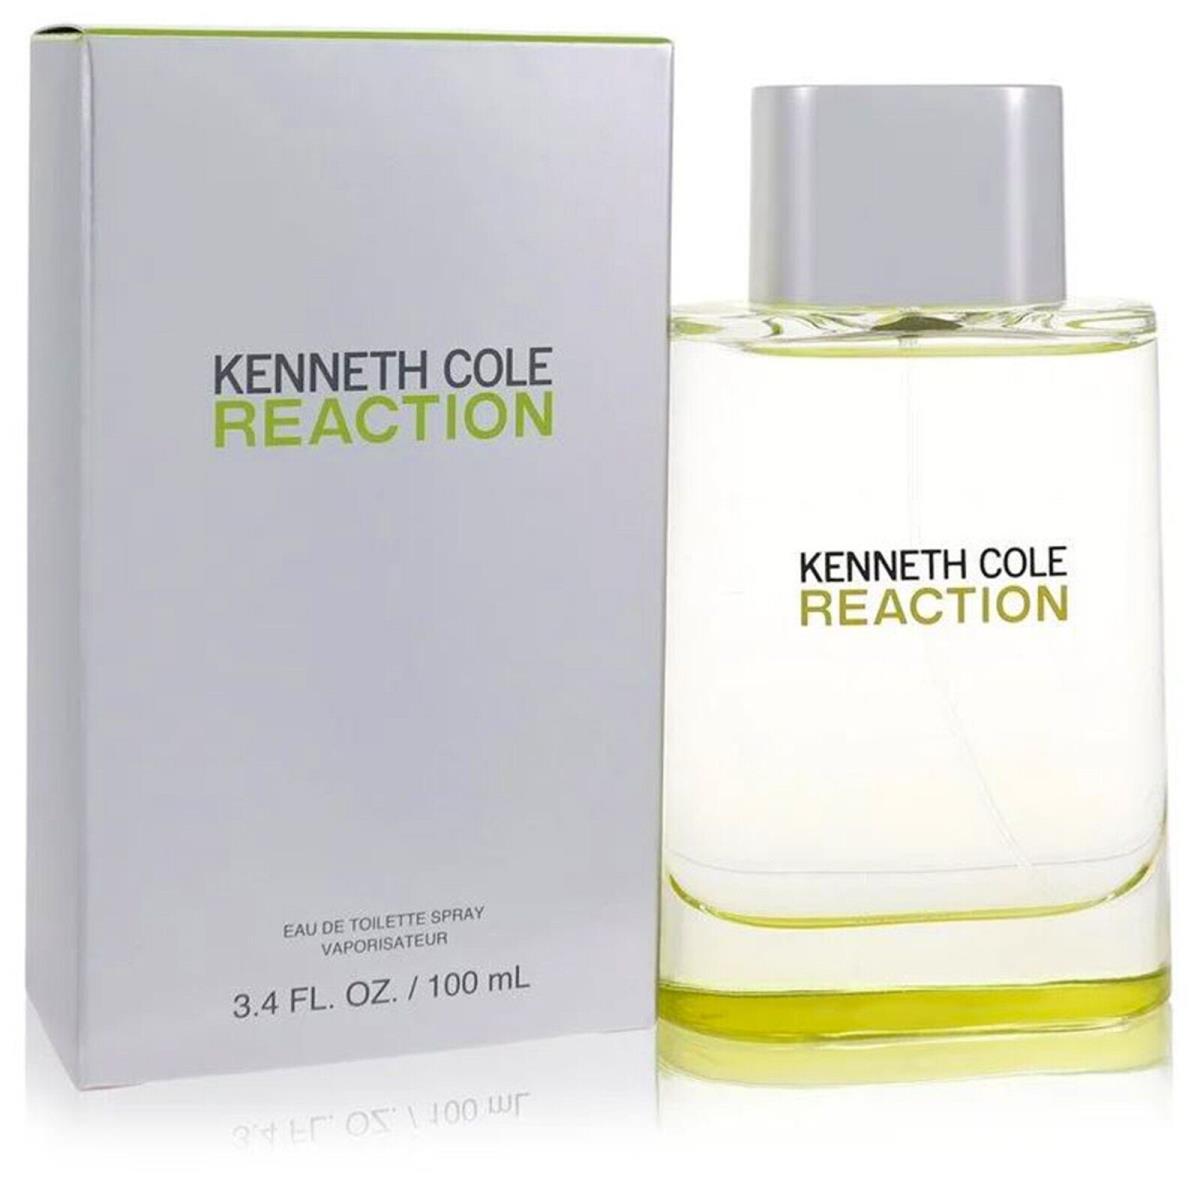 Kenneth Cole Reaction Cologne by Kenneth Cole Men Perfume Edt 3.4 oz Spray 100ml